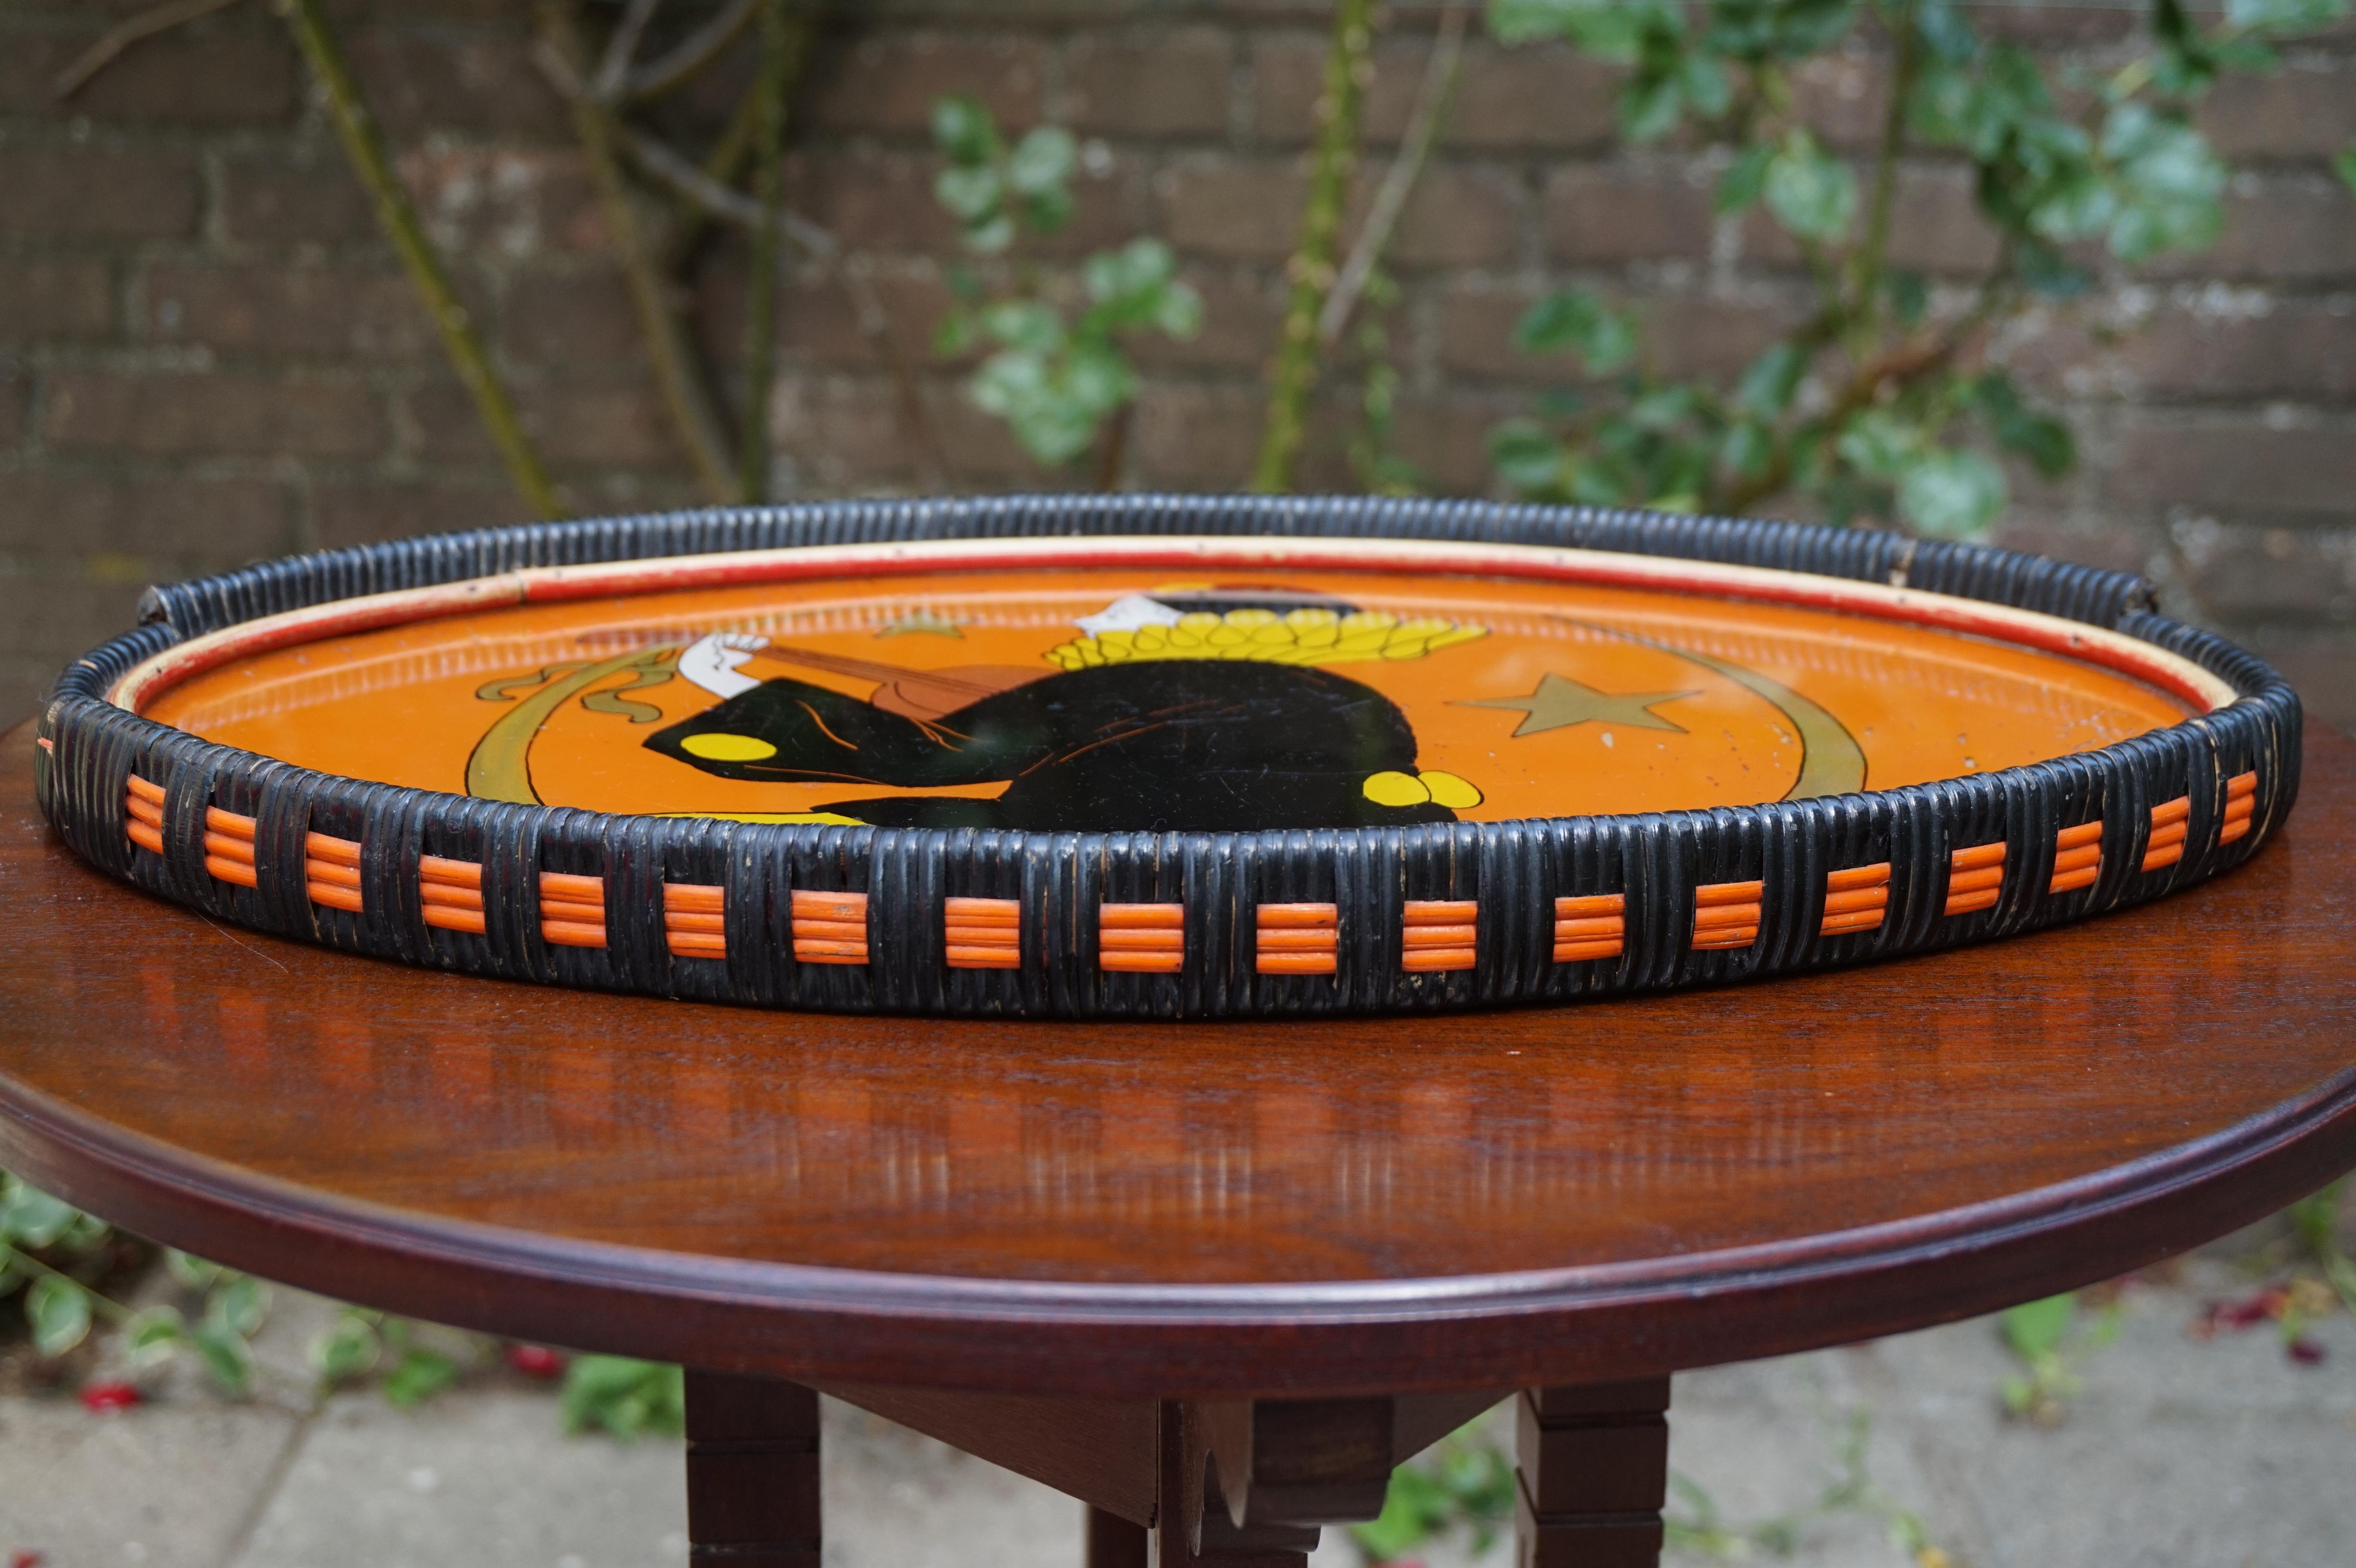 All handcrafted and vibrant Art Deco tray, signed Manon.

If you are looking for something special to decorate your table, dresser or credenza with then this mixed materials work of art from the 1930s Art Deco era could be perfect. The oval shape